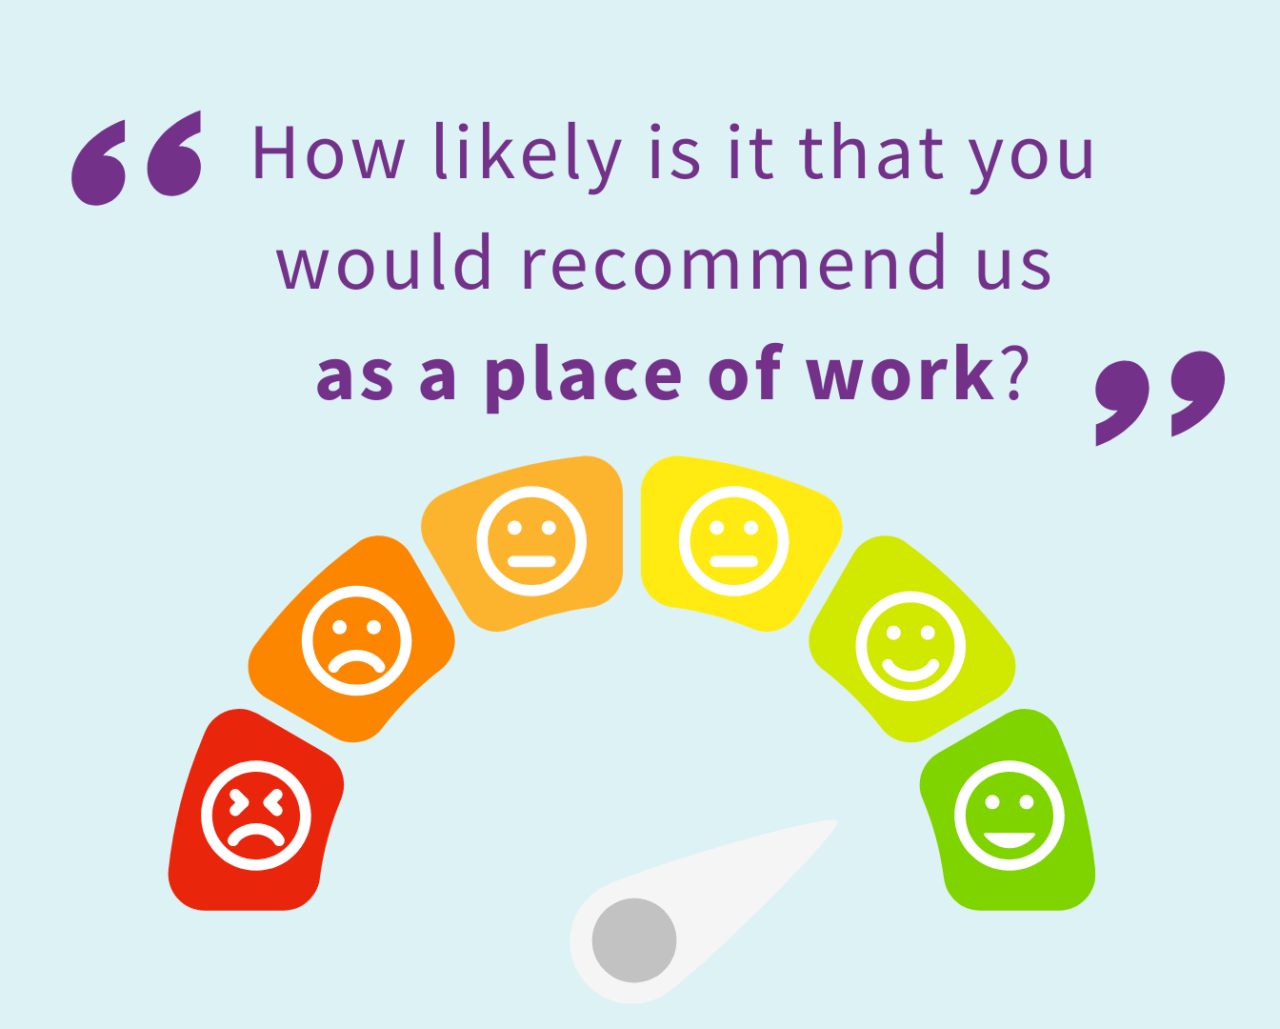 How likely is it that you would recommend us as a place of work?